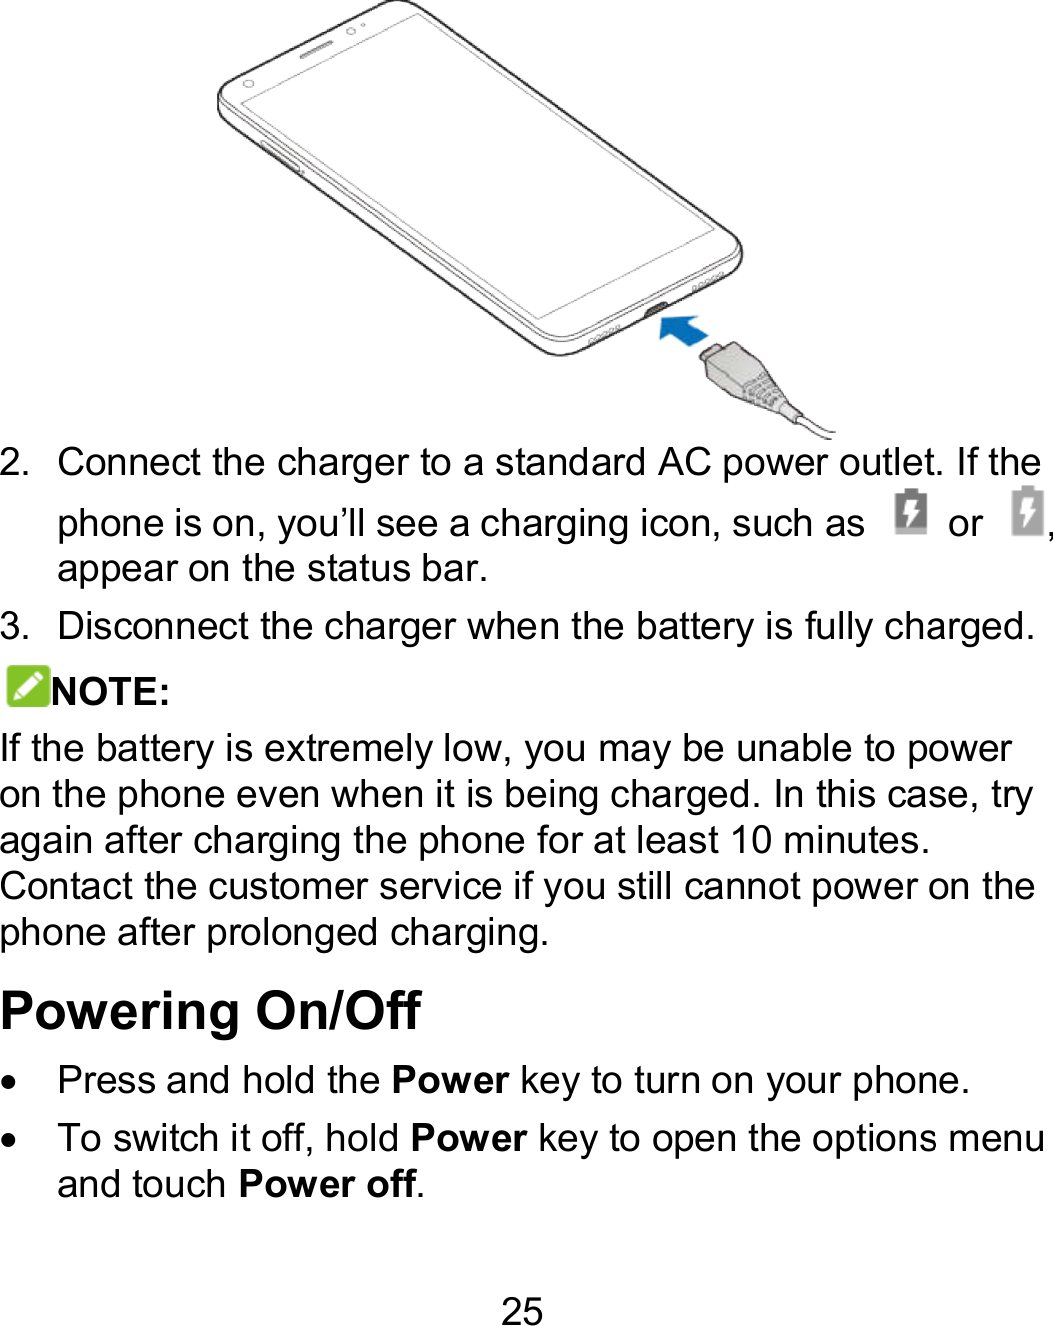 25  2. Connect the charger to a standard AC power outlet.phone is on, you’ll see a charging icon, such as  appear on the status bar. 3. Disconnect the charger when the battery is fully charged.NOTE: If the battery is extremely low, you may be unable to power on the phone even when it is being charged. In this case, try again after charging the phone for at least 10 minutes. Contact the customer service if you still cannot power on the phone after prolonged charging. Powering On/Off   Press and hold the Power key to turn on your phone.  To switch it off, hold Power key to open the options menu and touch Power off. Connect the charger to a standard AC power outlet. If the  or  , Disconnect the charger when the battery is fully charged. If the battery is extremely low, you may be unable to power on the phone even when it is being charged. In this case, try 0 minutes. Contact the customer service if you still cannot power on the to turn on your phone. to open the options menu 